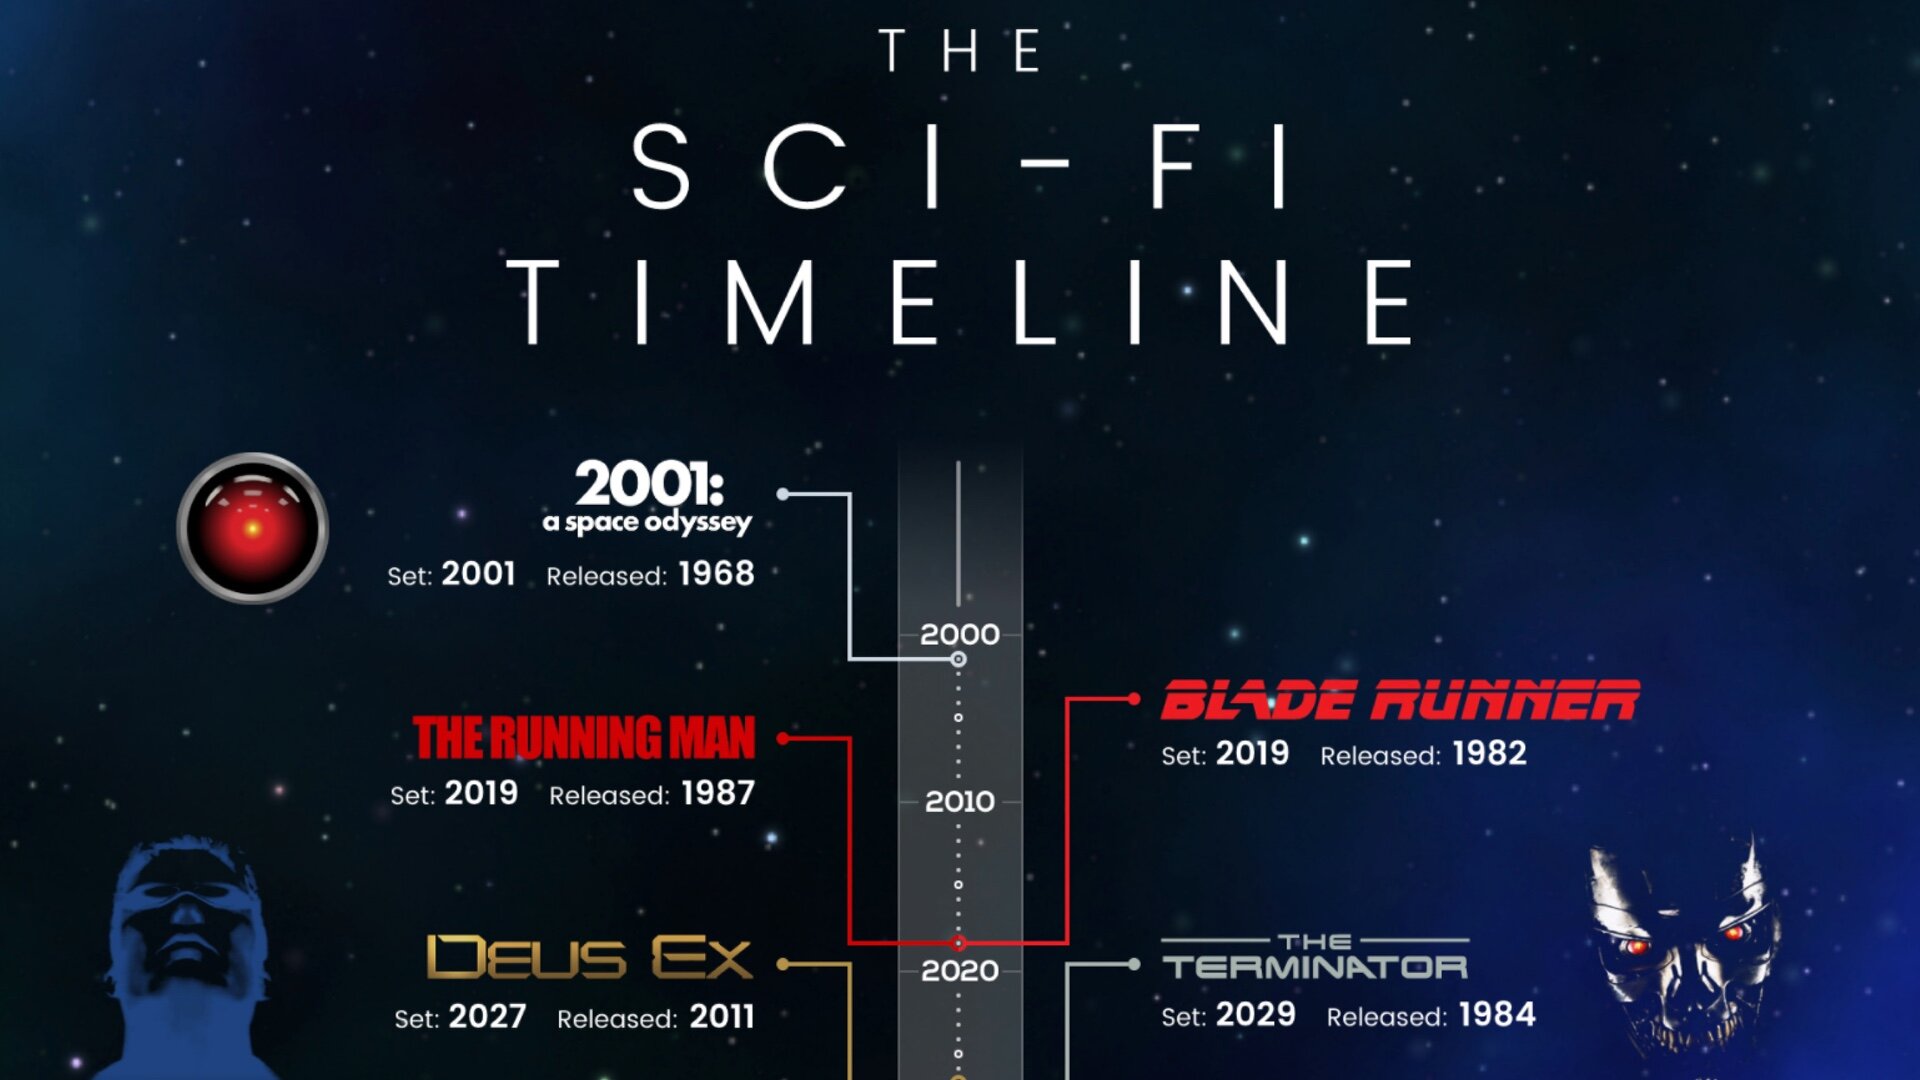 The SciFi Timeline Infographic Shows Us When Popular SciFi Films and